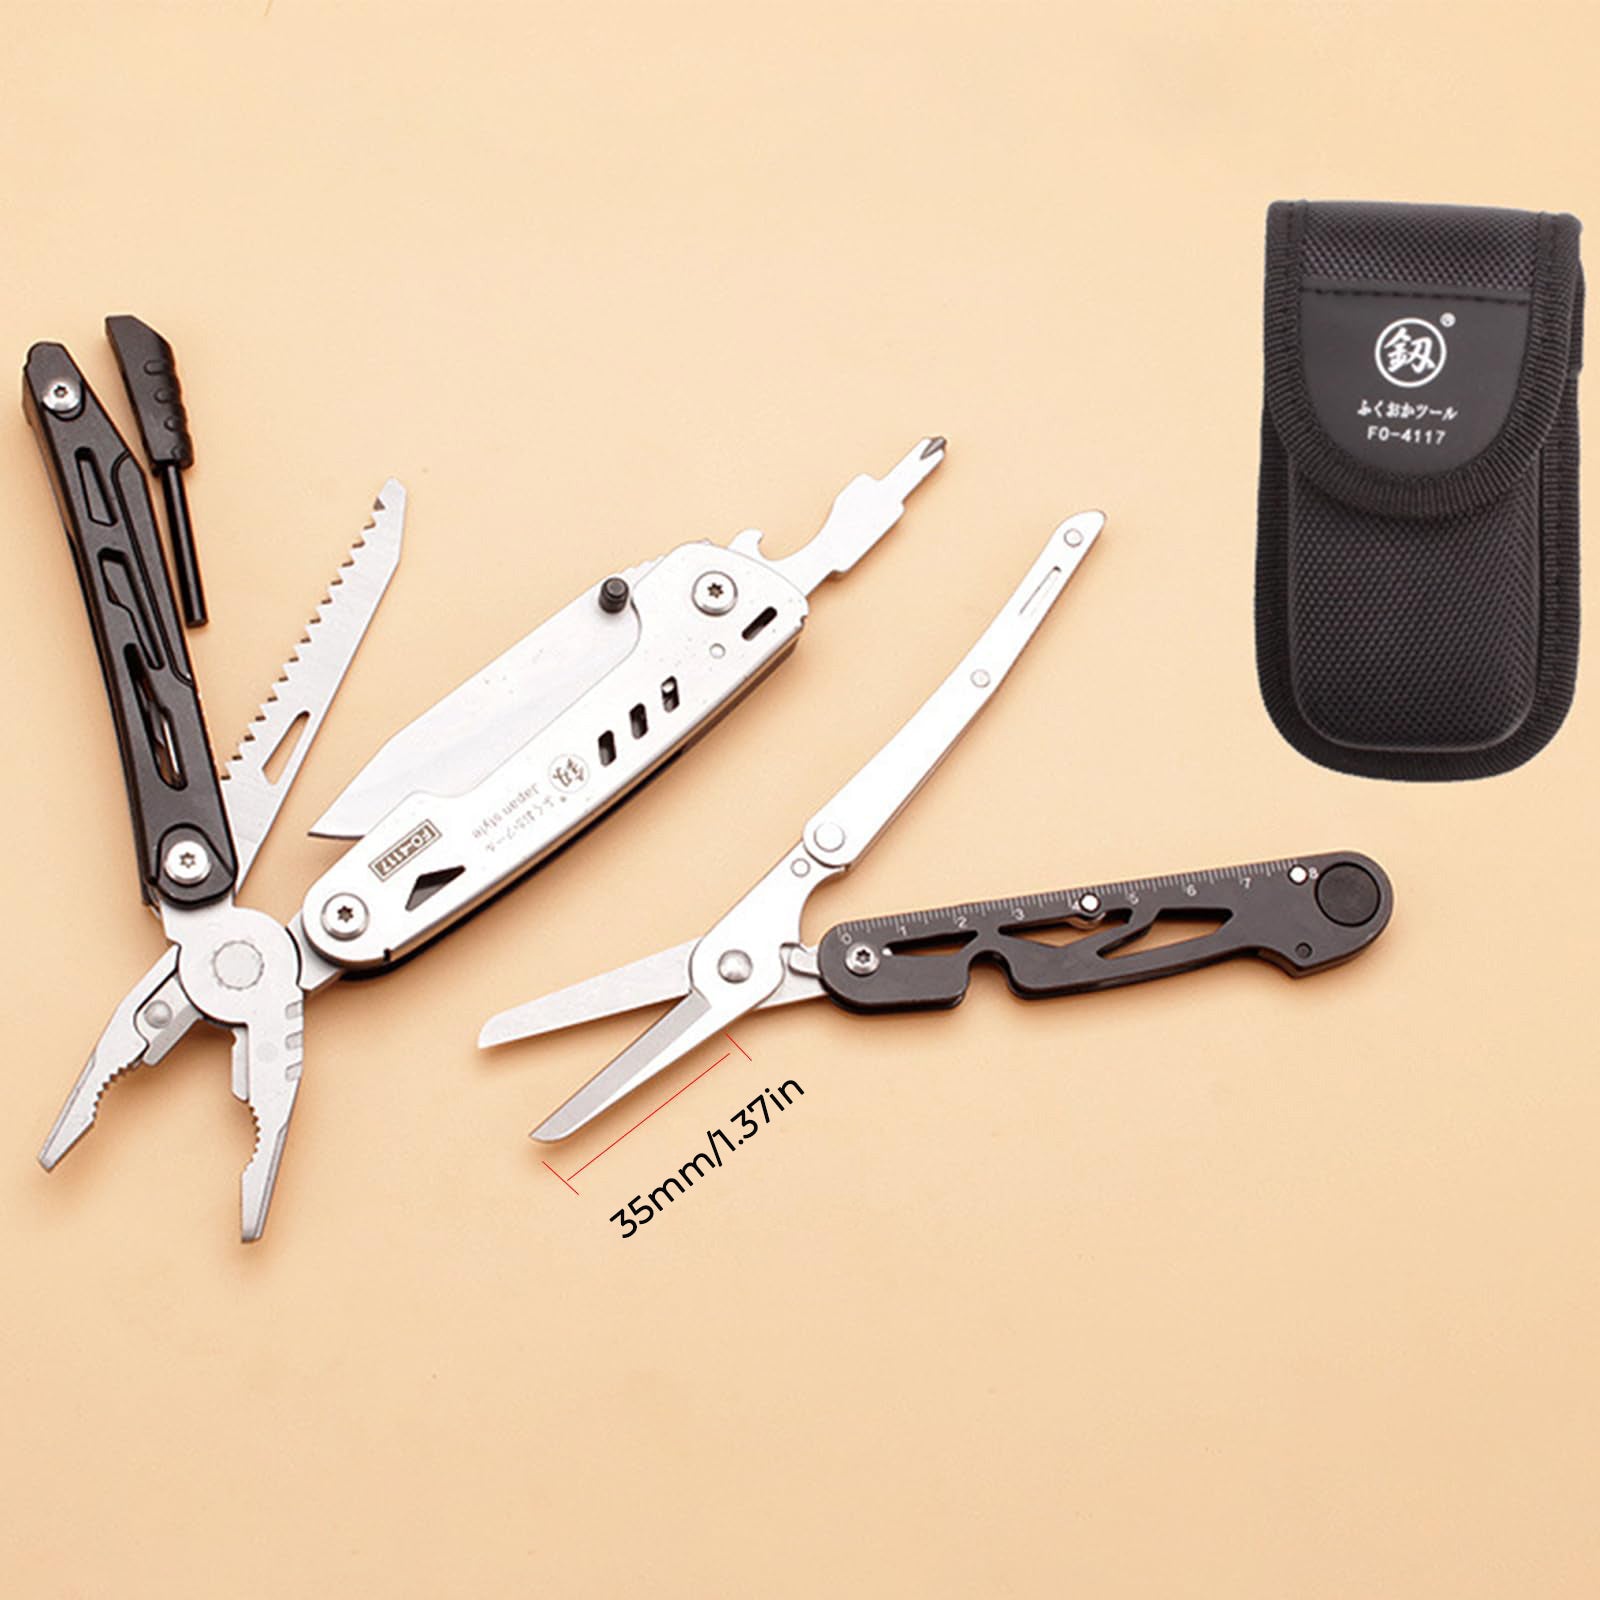 Pocket Multitool - Versatile Men's Utility Tool with Large Scissors - Ideal for Survival, Camping, Fishing, and BBQ Adventures